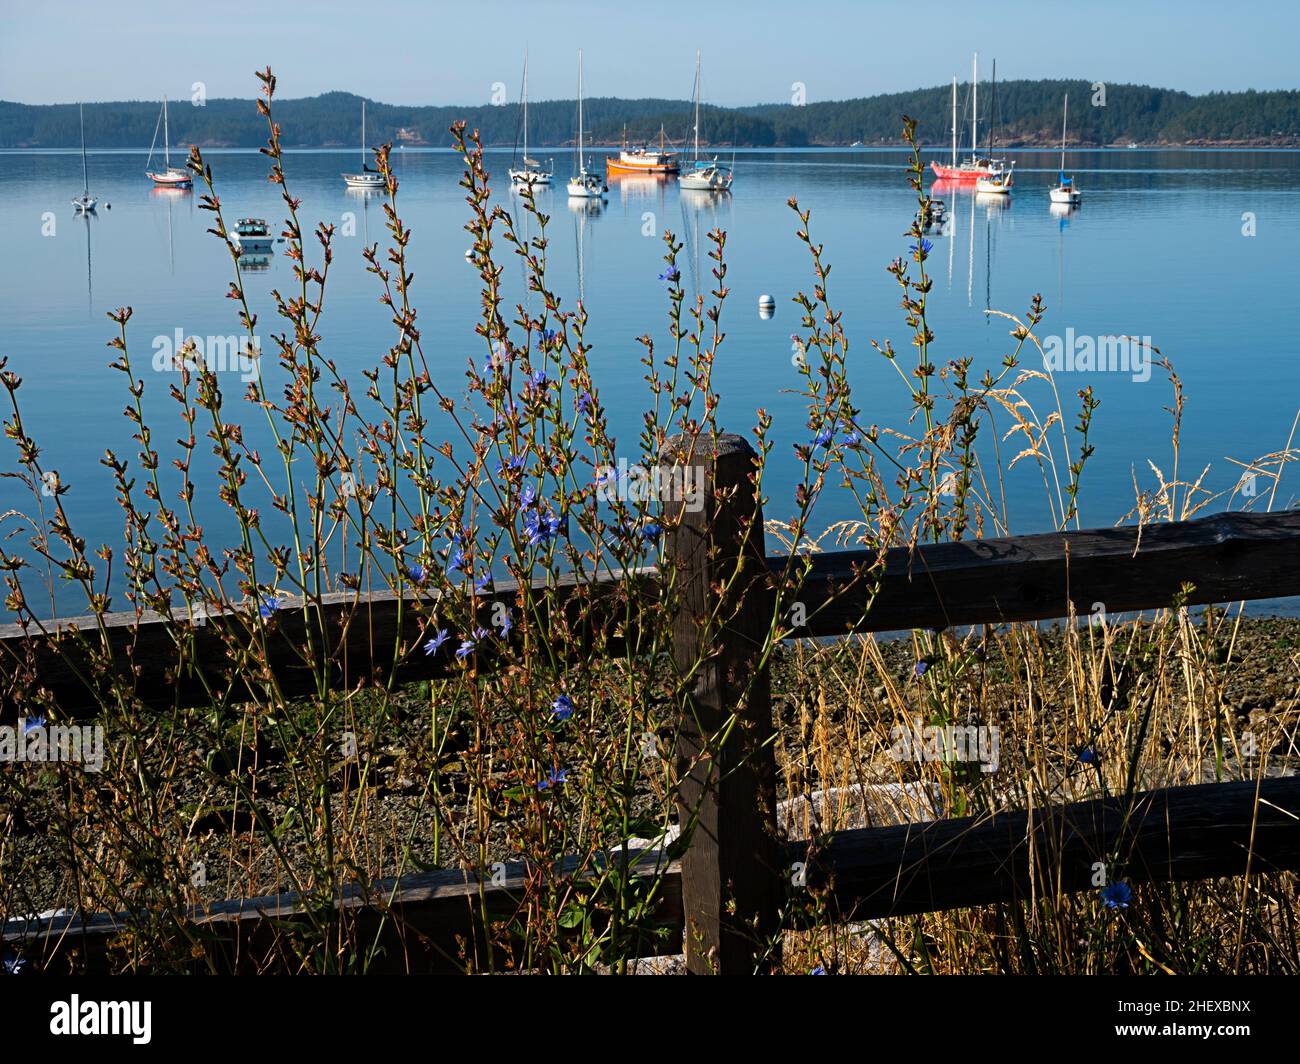 WA21089-00...WASHINGTON - Fence and weeds along the edge of the road to Deer Harbor overlooking West Sound on Orcas Island. Stock Photo